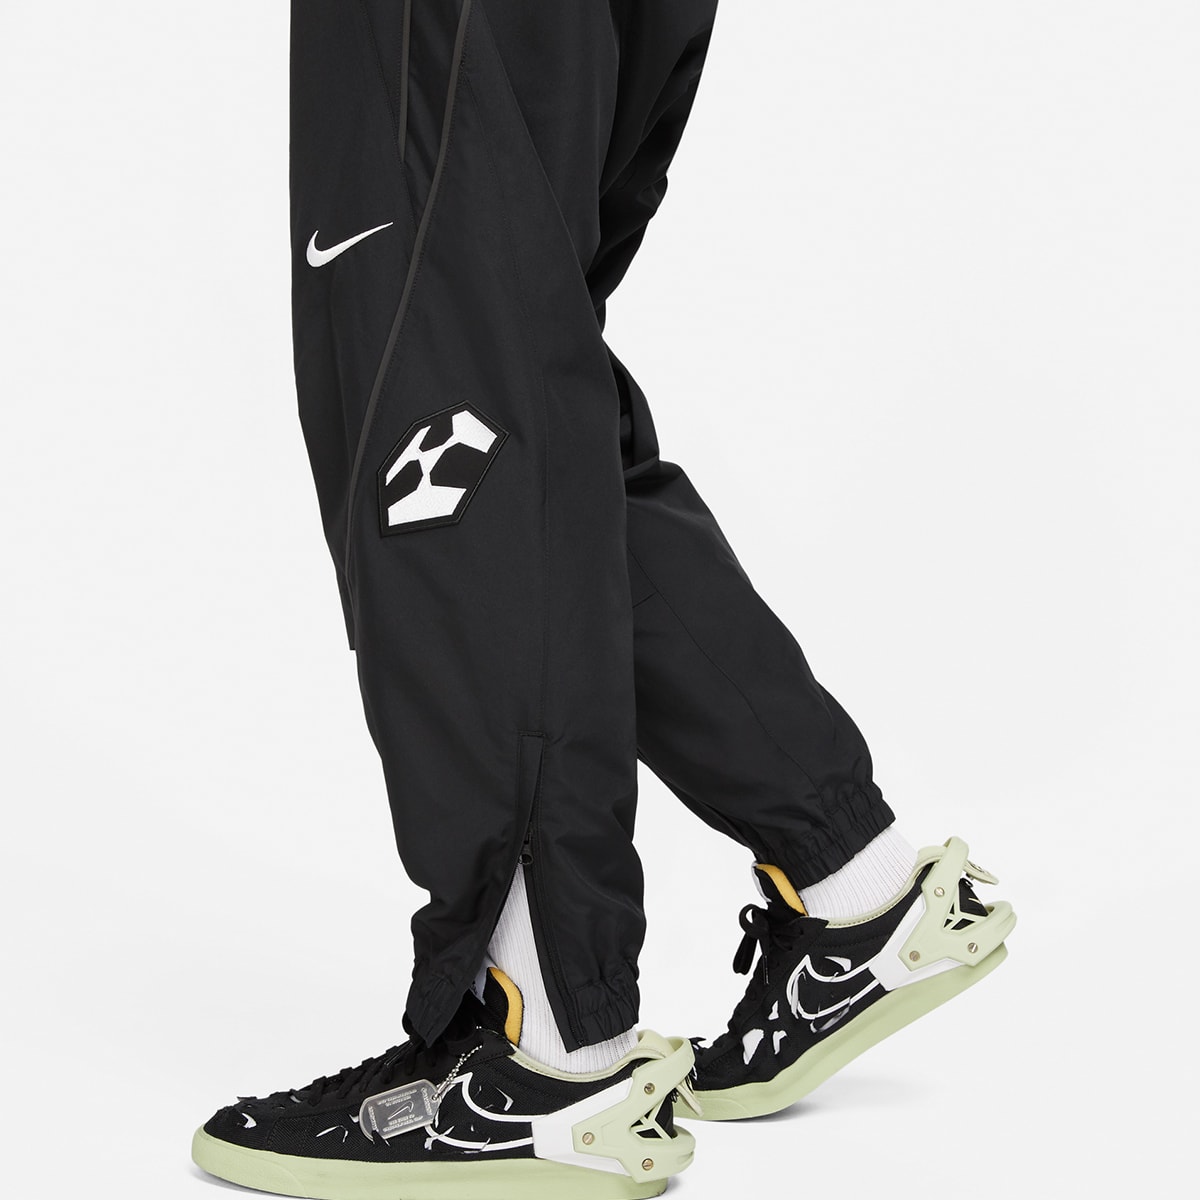 Nike x Acronym Woven Pant (Black) | END. Launches